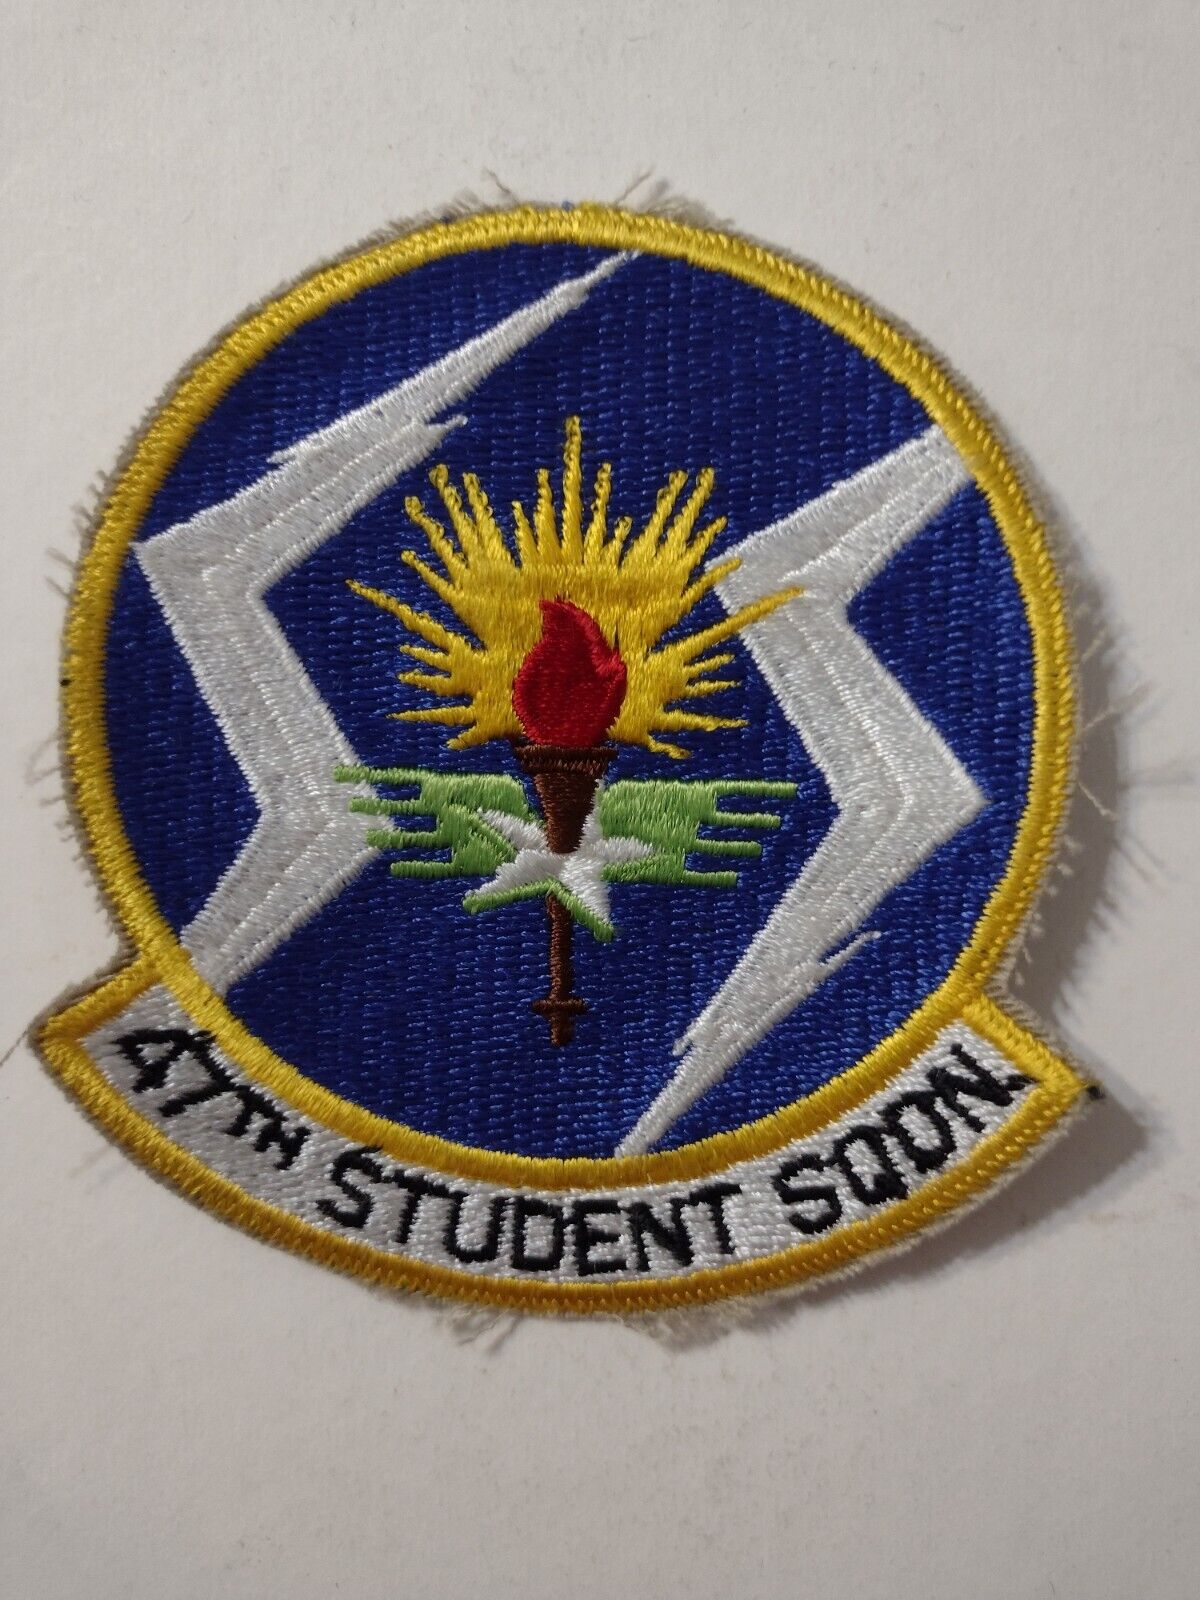 USAF 47th STUDENT SQUADRON PATCH  :KY24-9